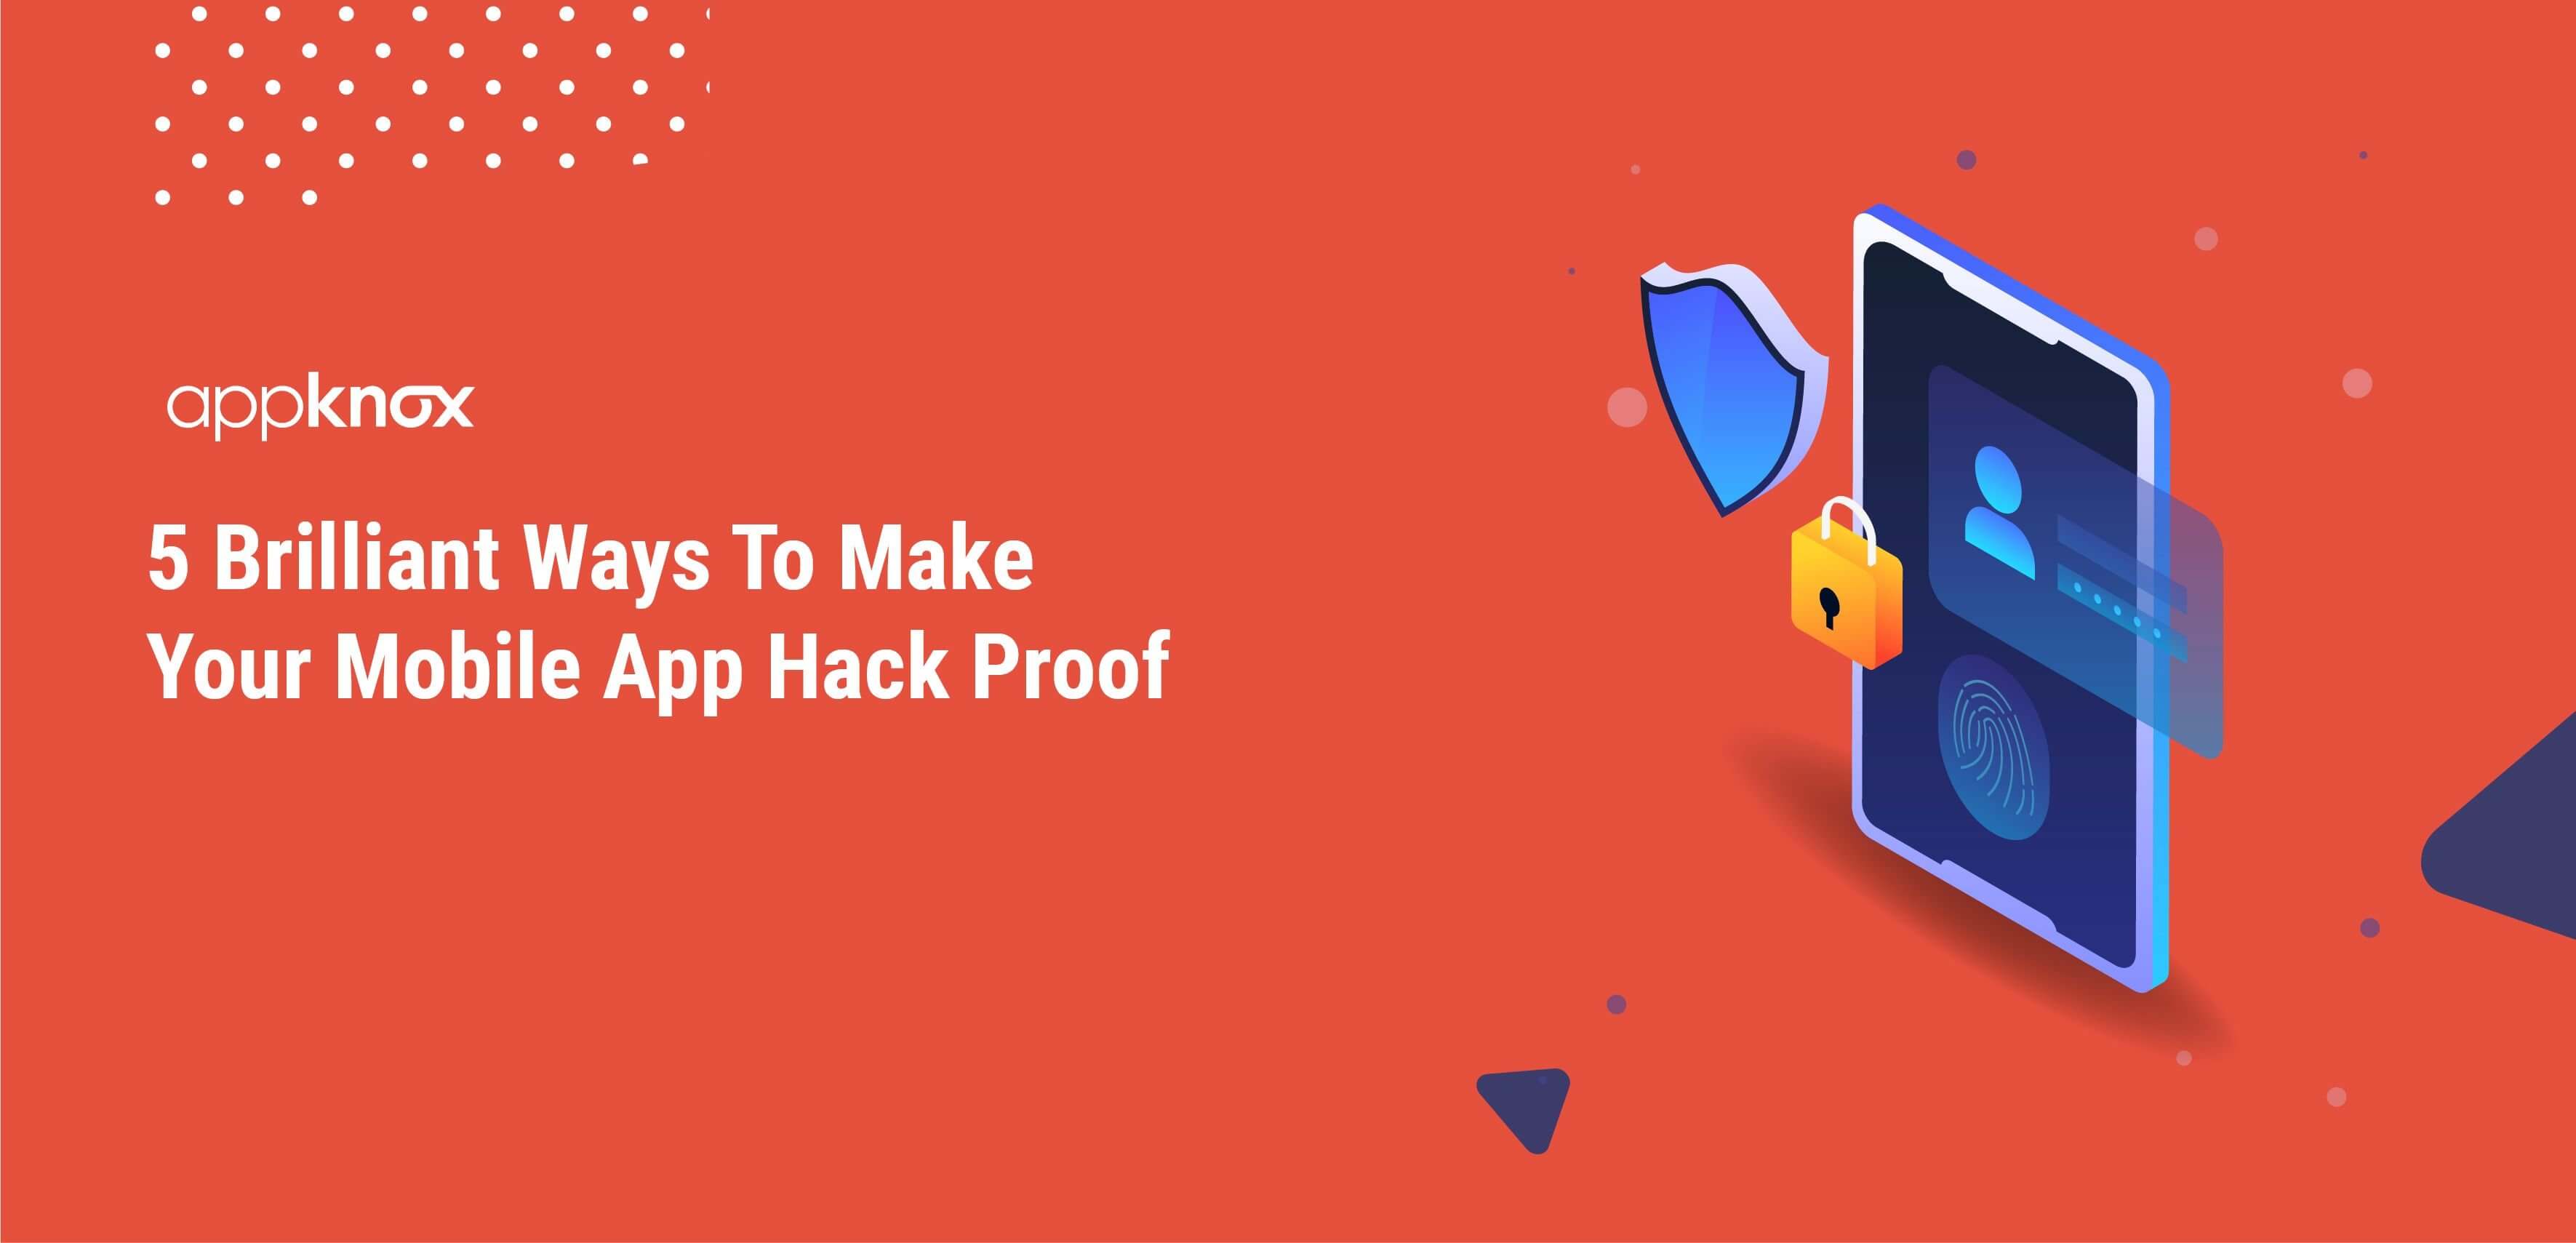 5 Brilliant Ways To Make Your Mobile App Hack Proof